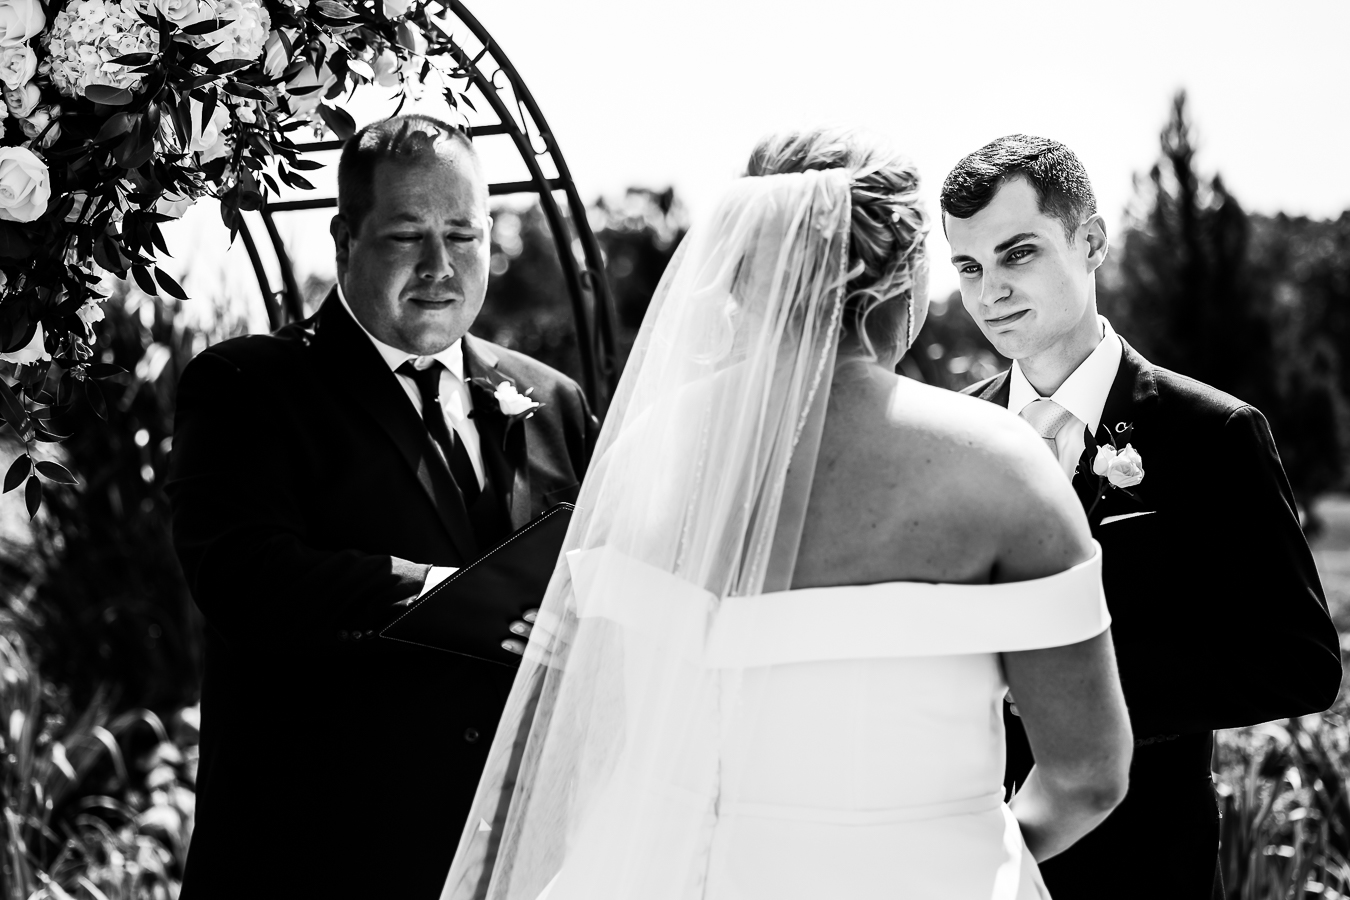 Virginia wedding photographer, lisa rhinehart, captures this black and white image of the groom looking into his brides eyes as they stand at the end of the aisle together during their wedding ceremony 